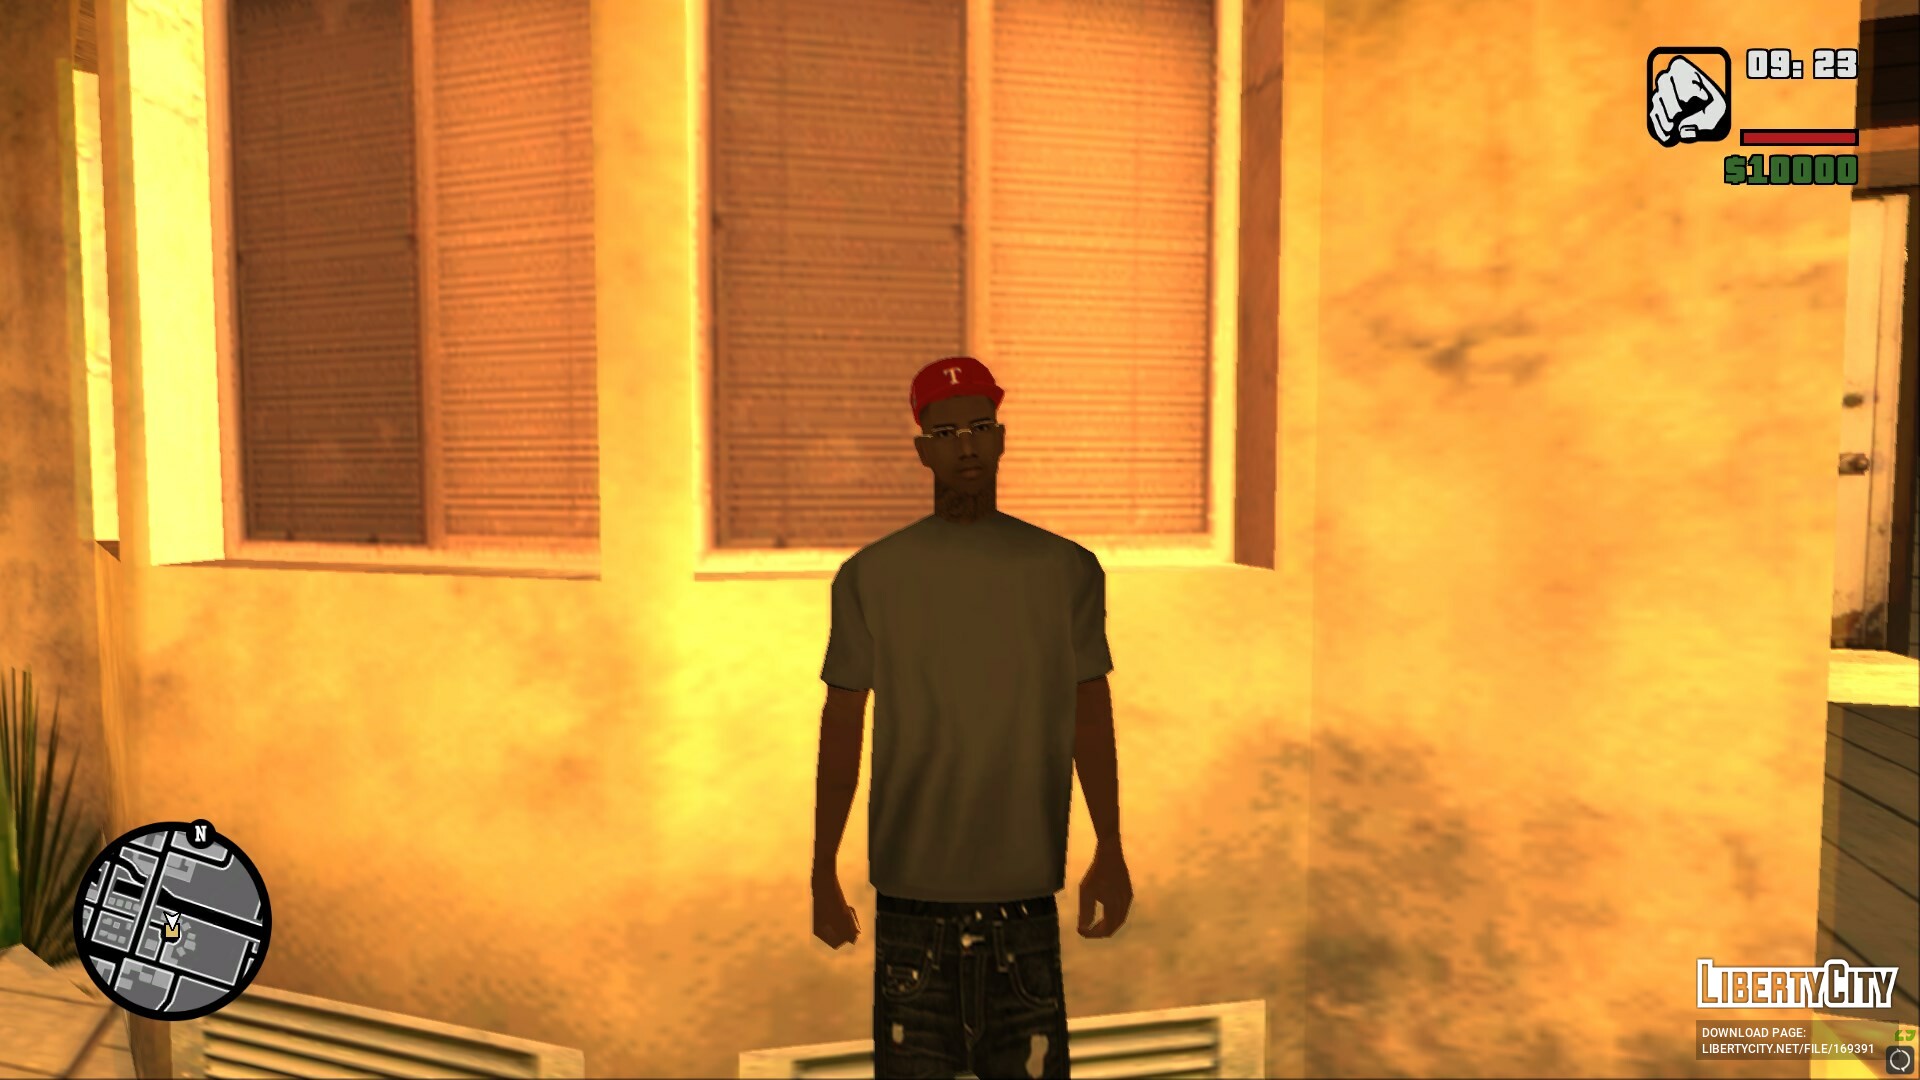 Files to replace SBMYCR.txd in GTA San Andreas (18 files) / Files have been  sorted by downloads in ascending order